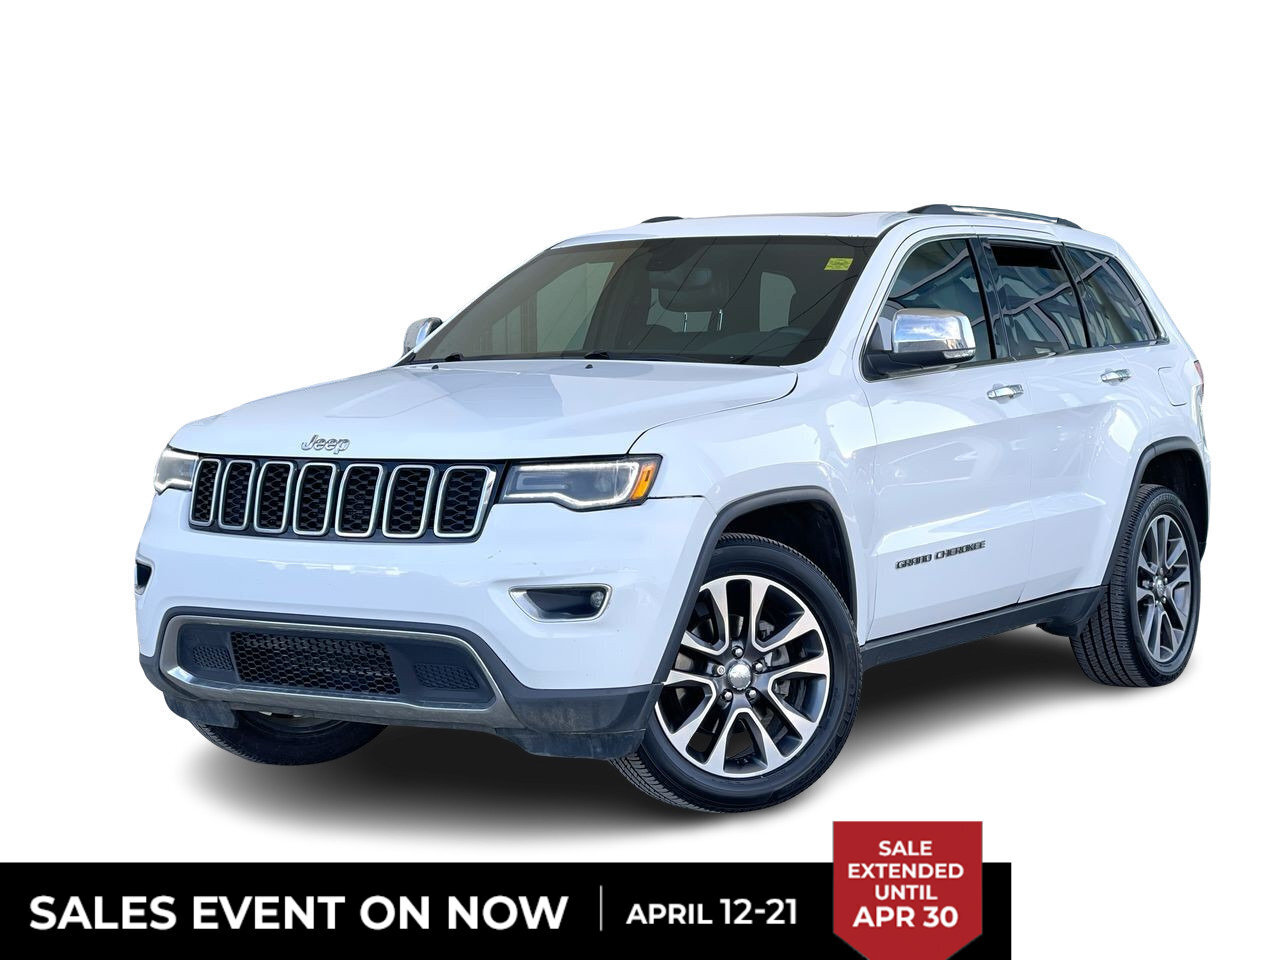 2018 Jeep Grand Cherokee Limited 4x4, Leather, Blind Spot Monitoring / 